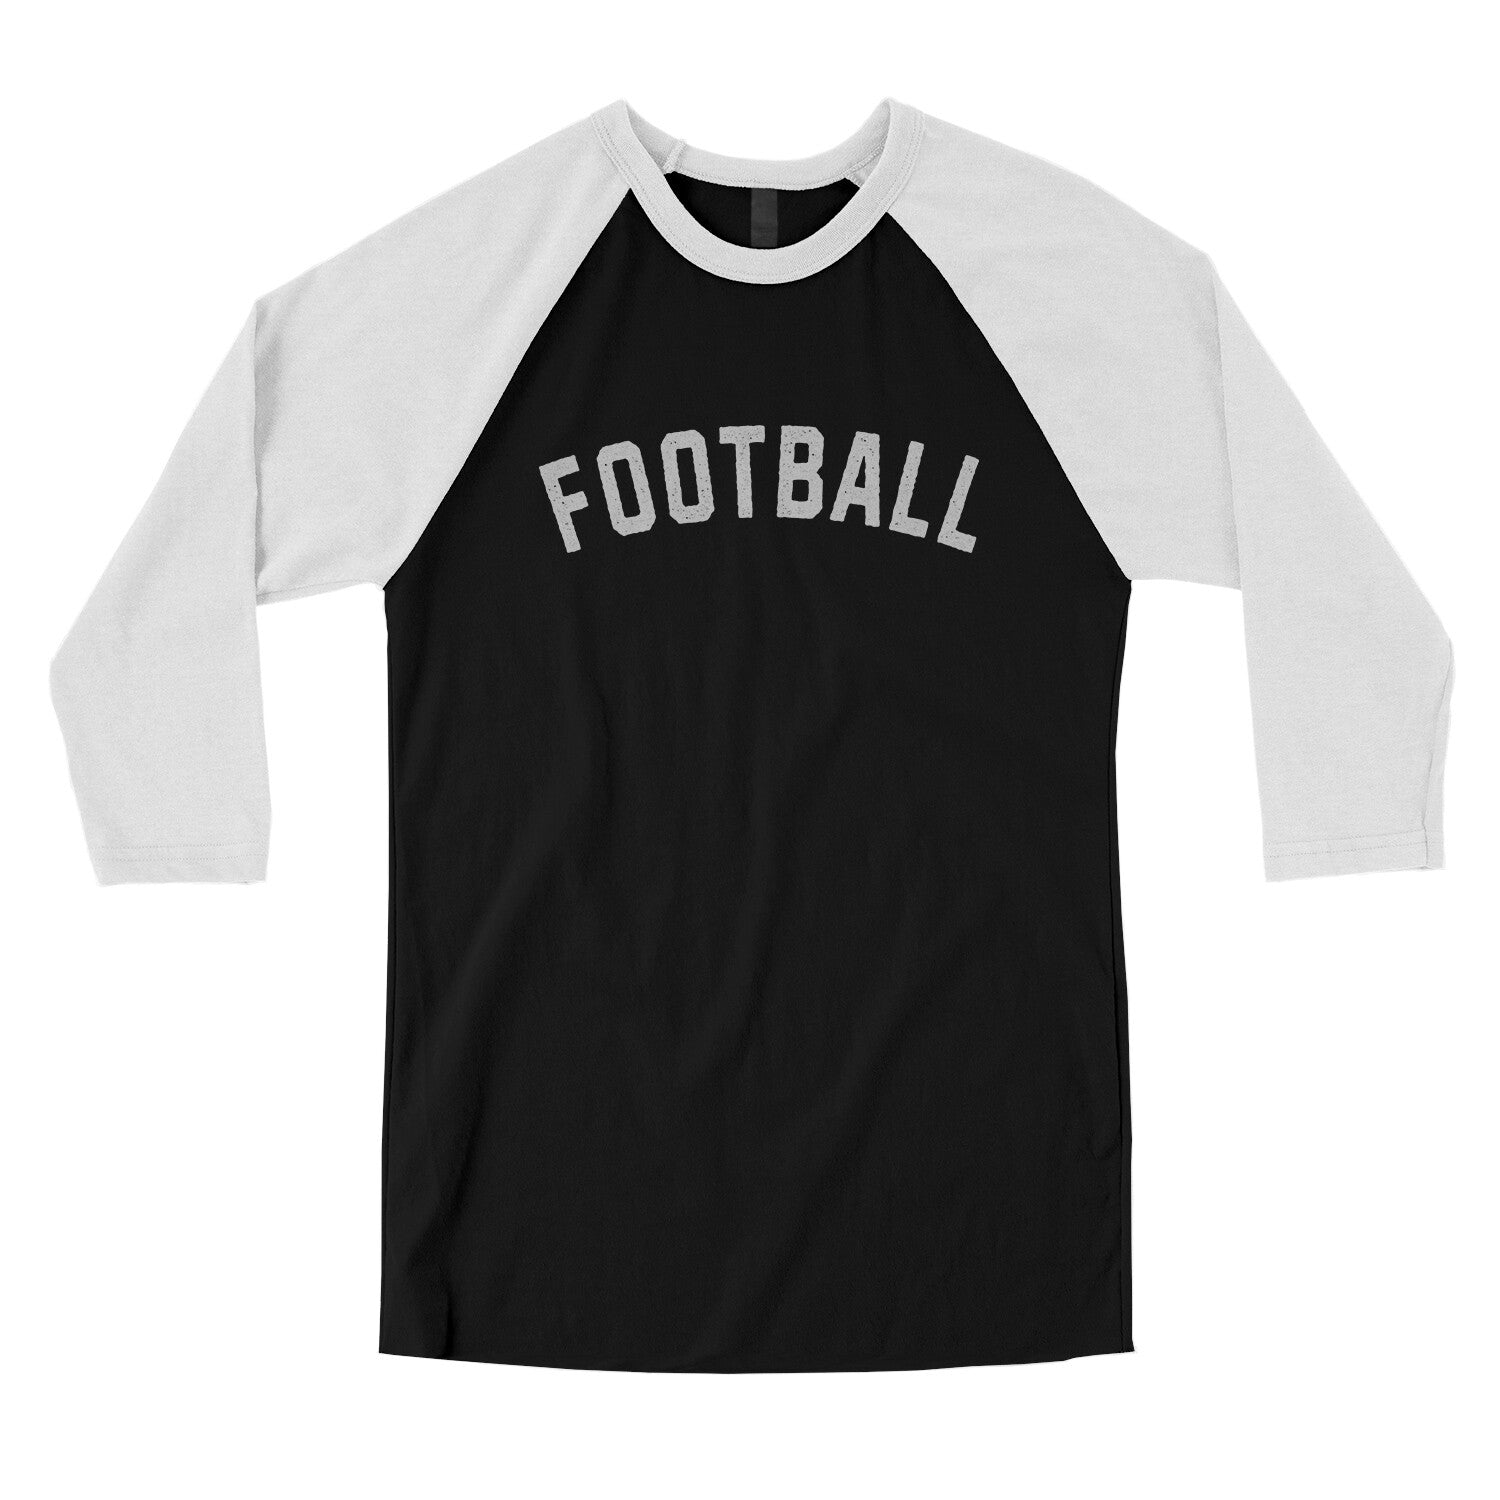 Football in Black with White Color